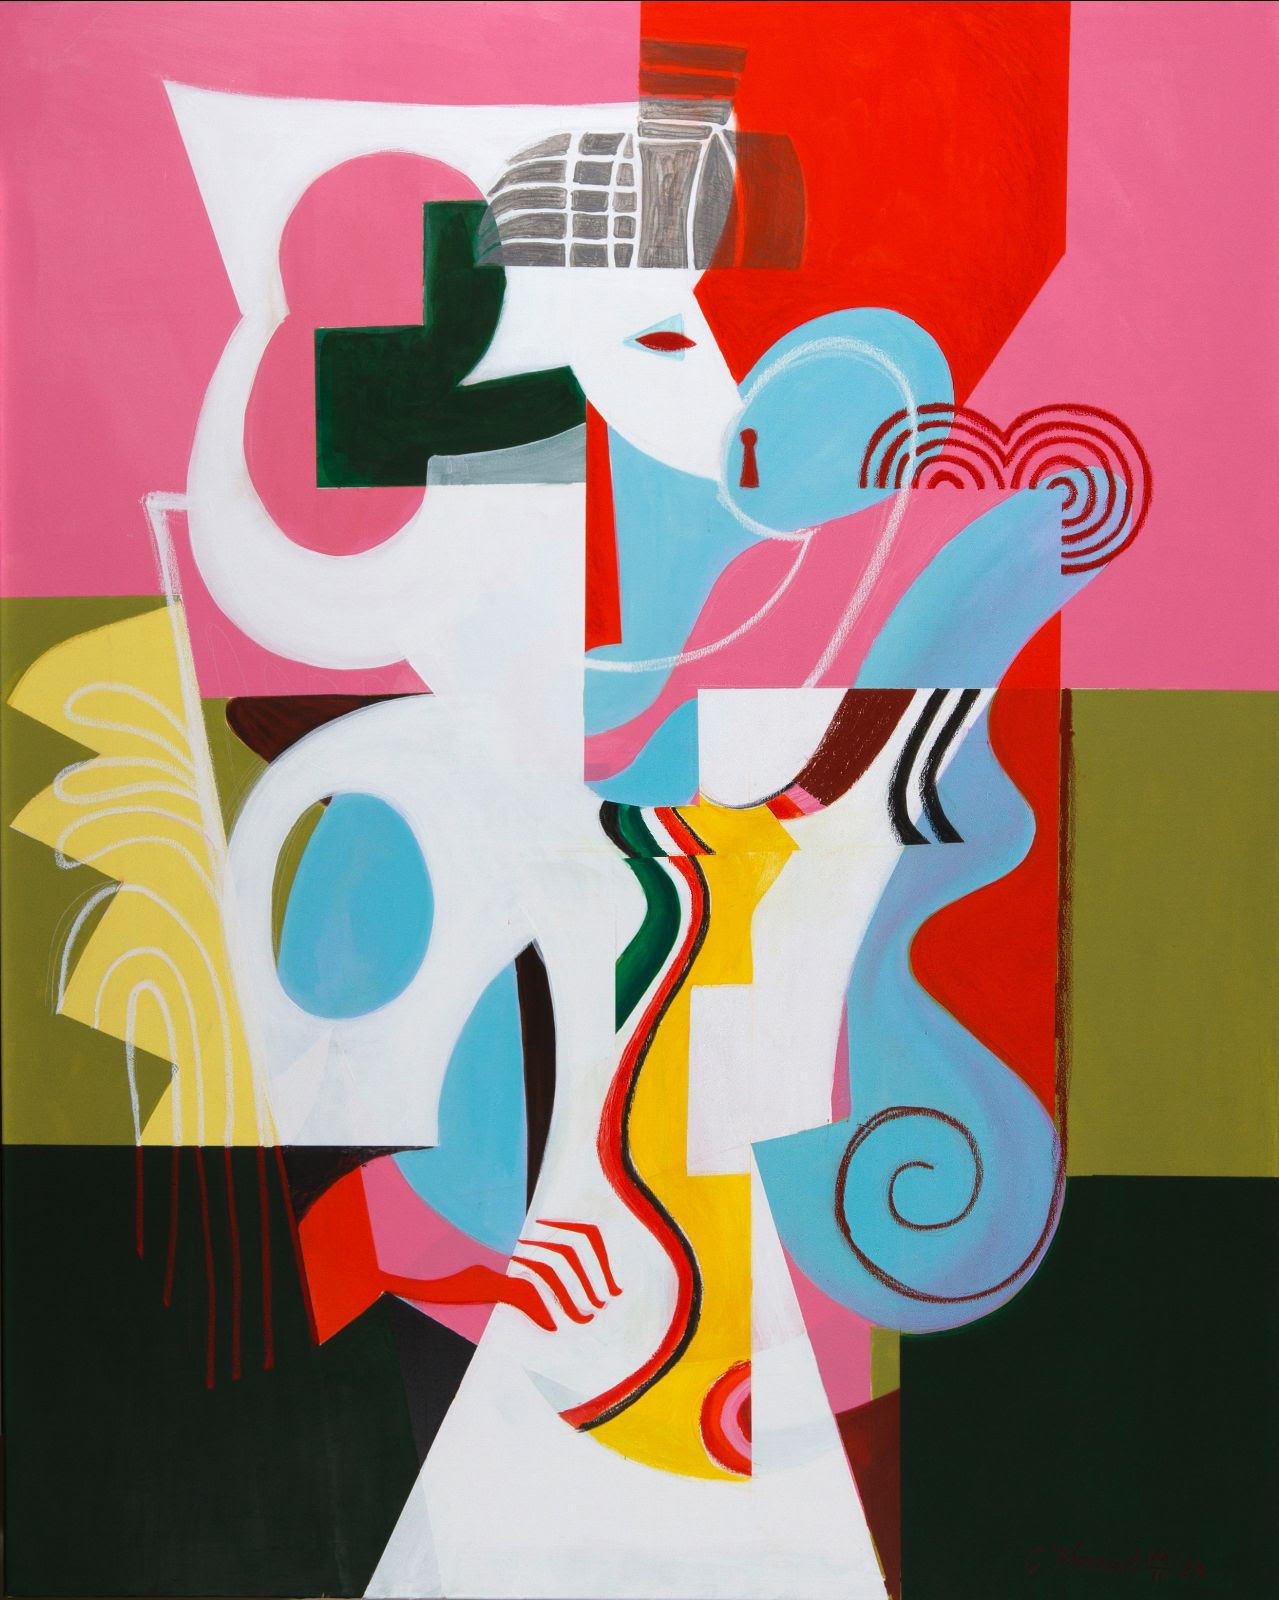 An abstract painting composed of pinks, reds, light blues, and greens, with the semblance of a human shape at the centre